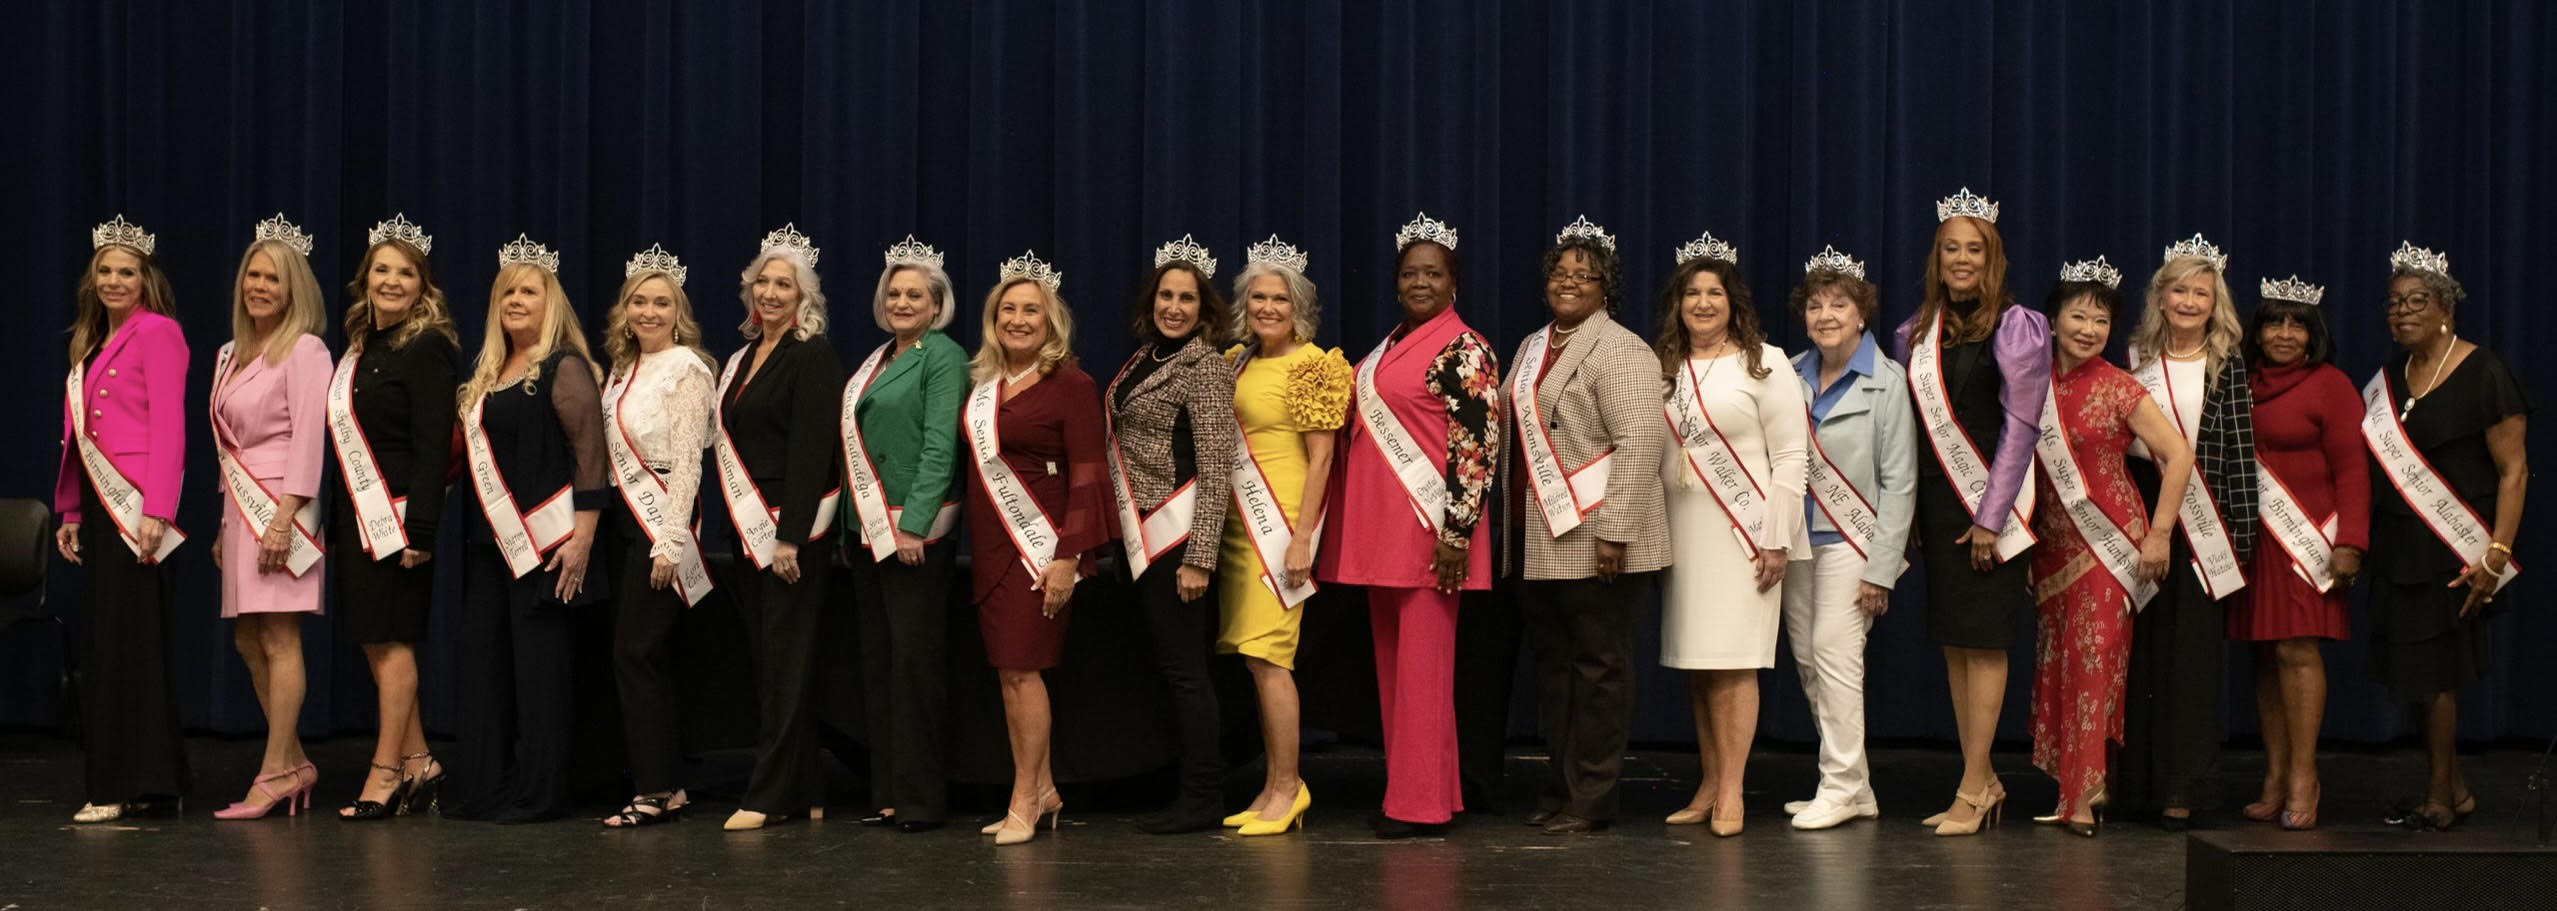 Ms. Senior Alabama Queens, Board members to meet-and-greet Chico's shoppers April 1